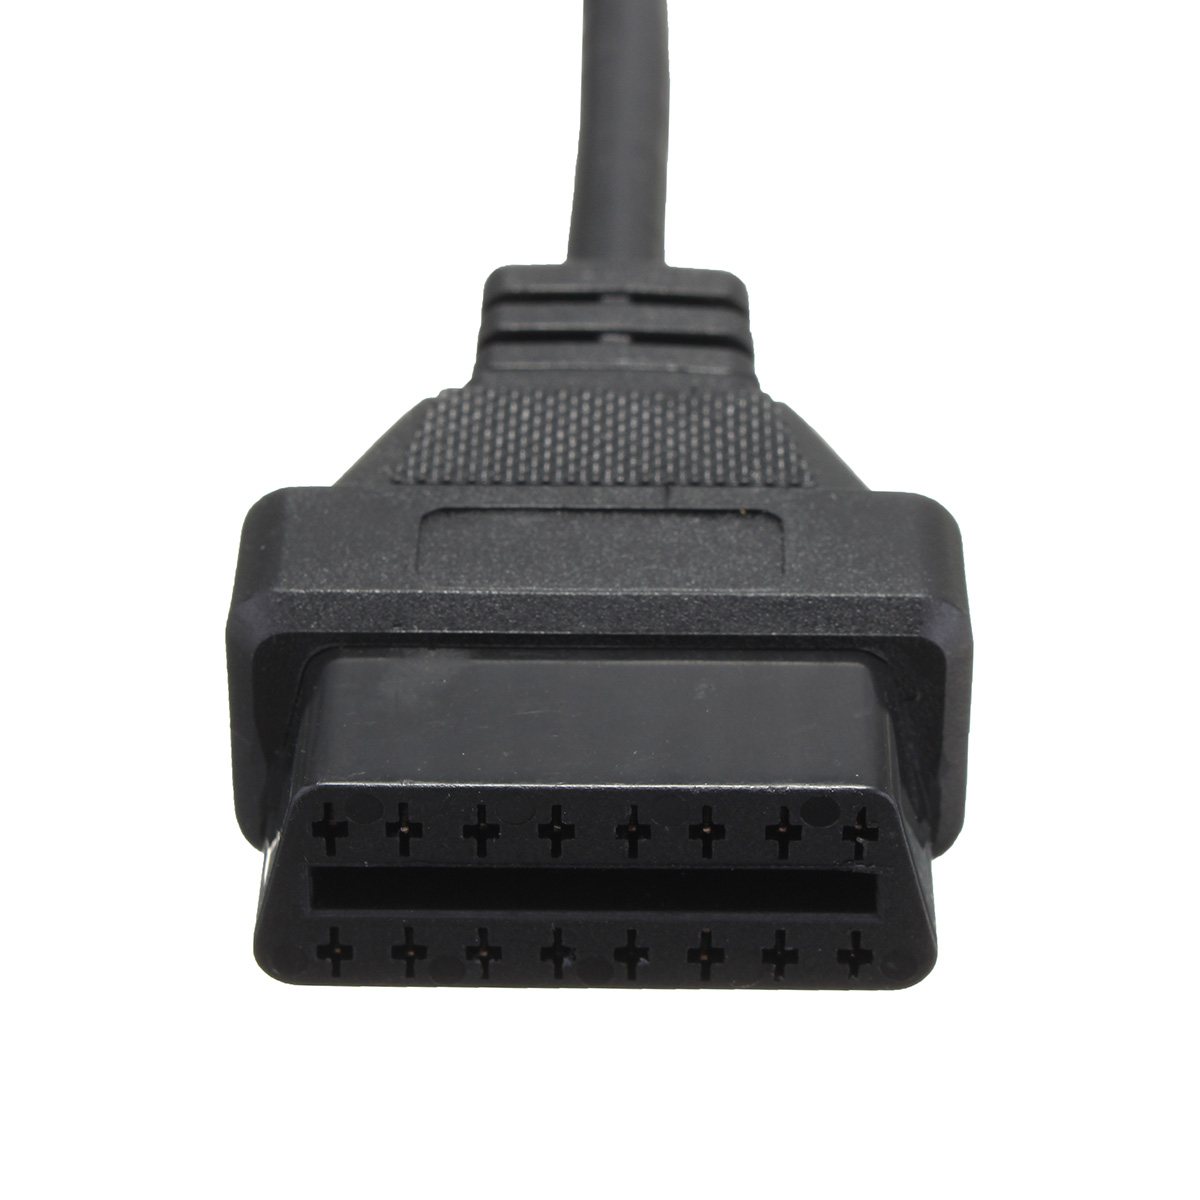 22 Pin OBD1 to 16 Pin OBD2 Convertor Adapter Cable for TOYOTA Diagnostic Scanner - Auto GoShop